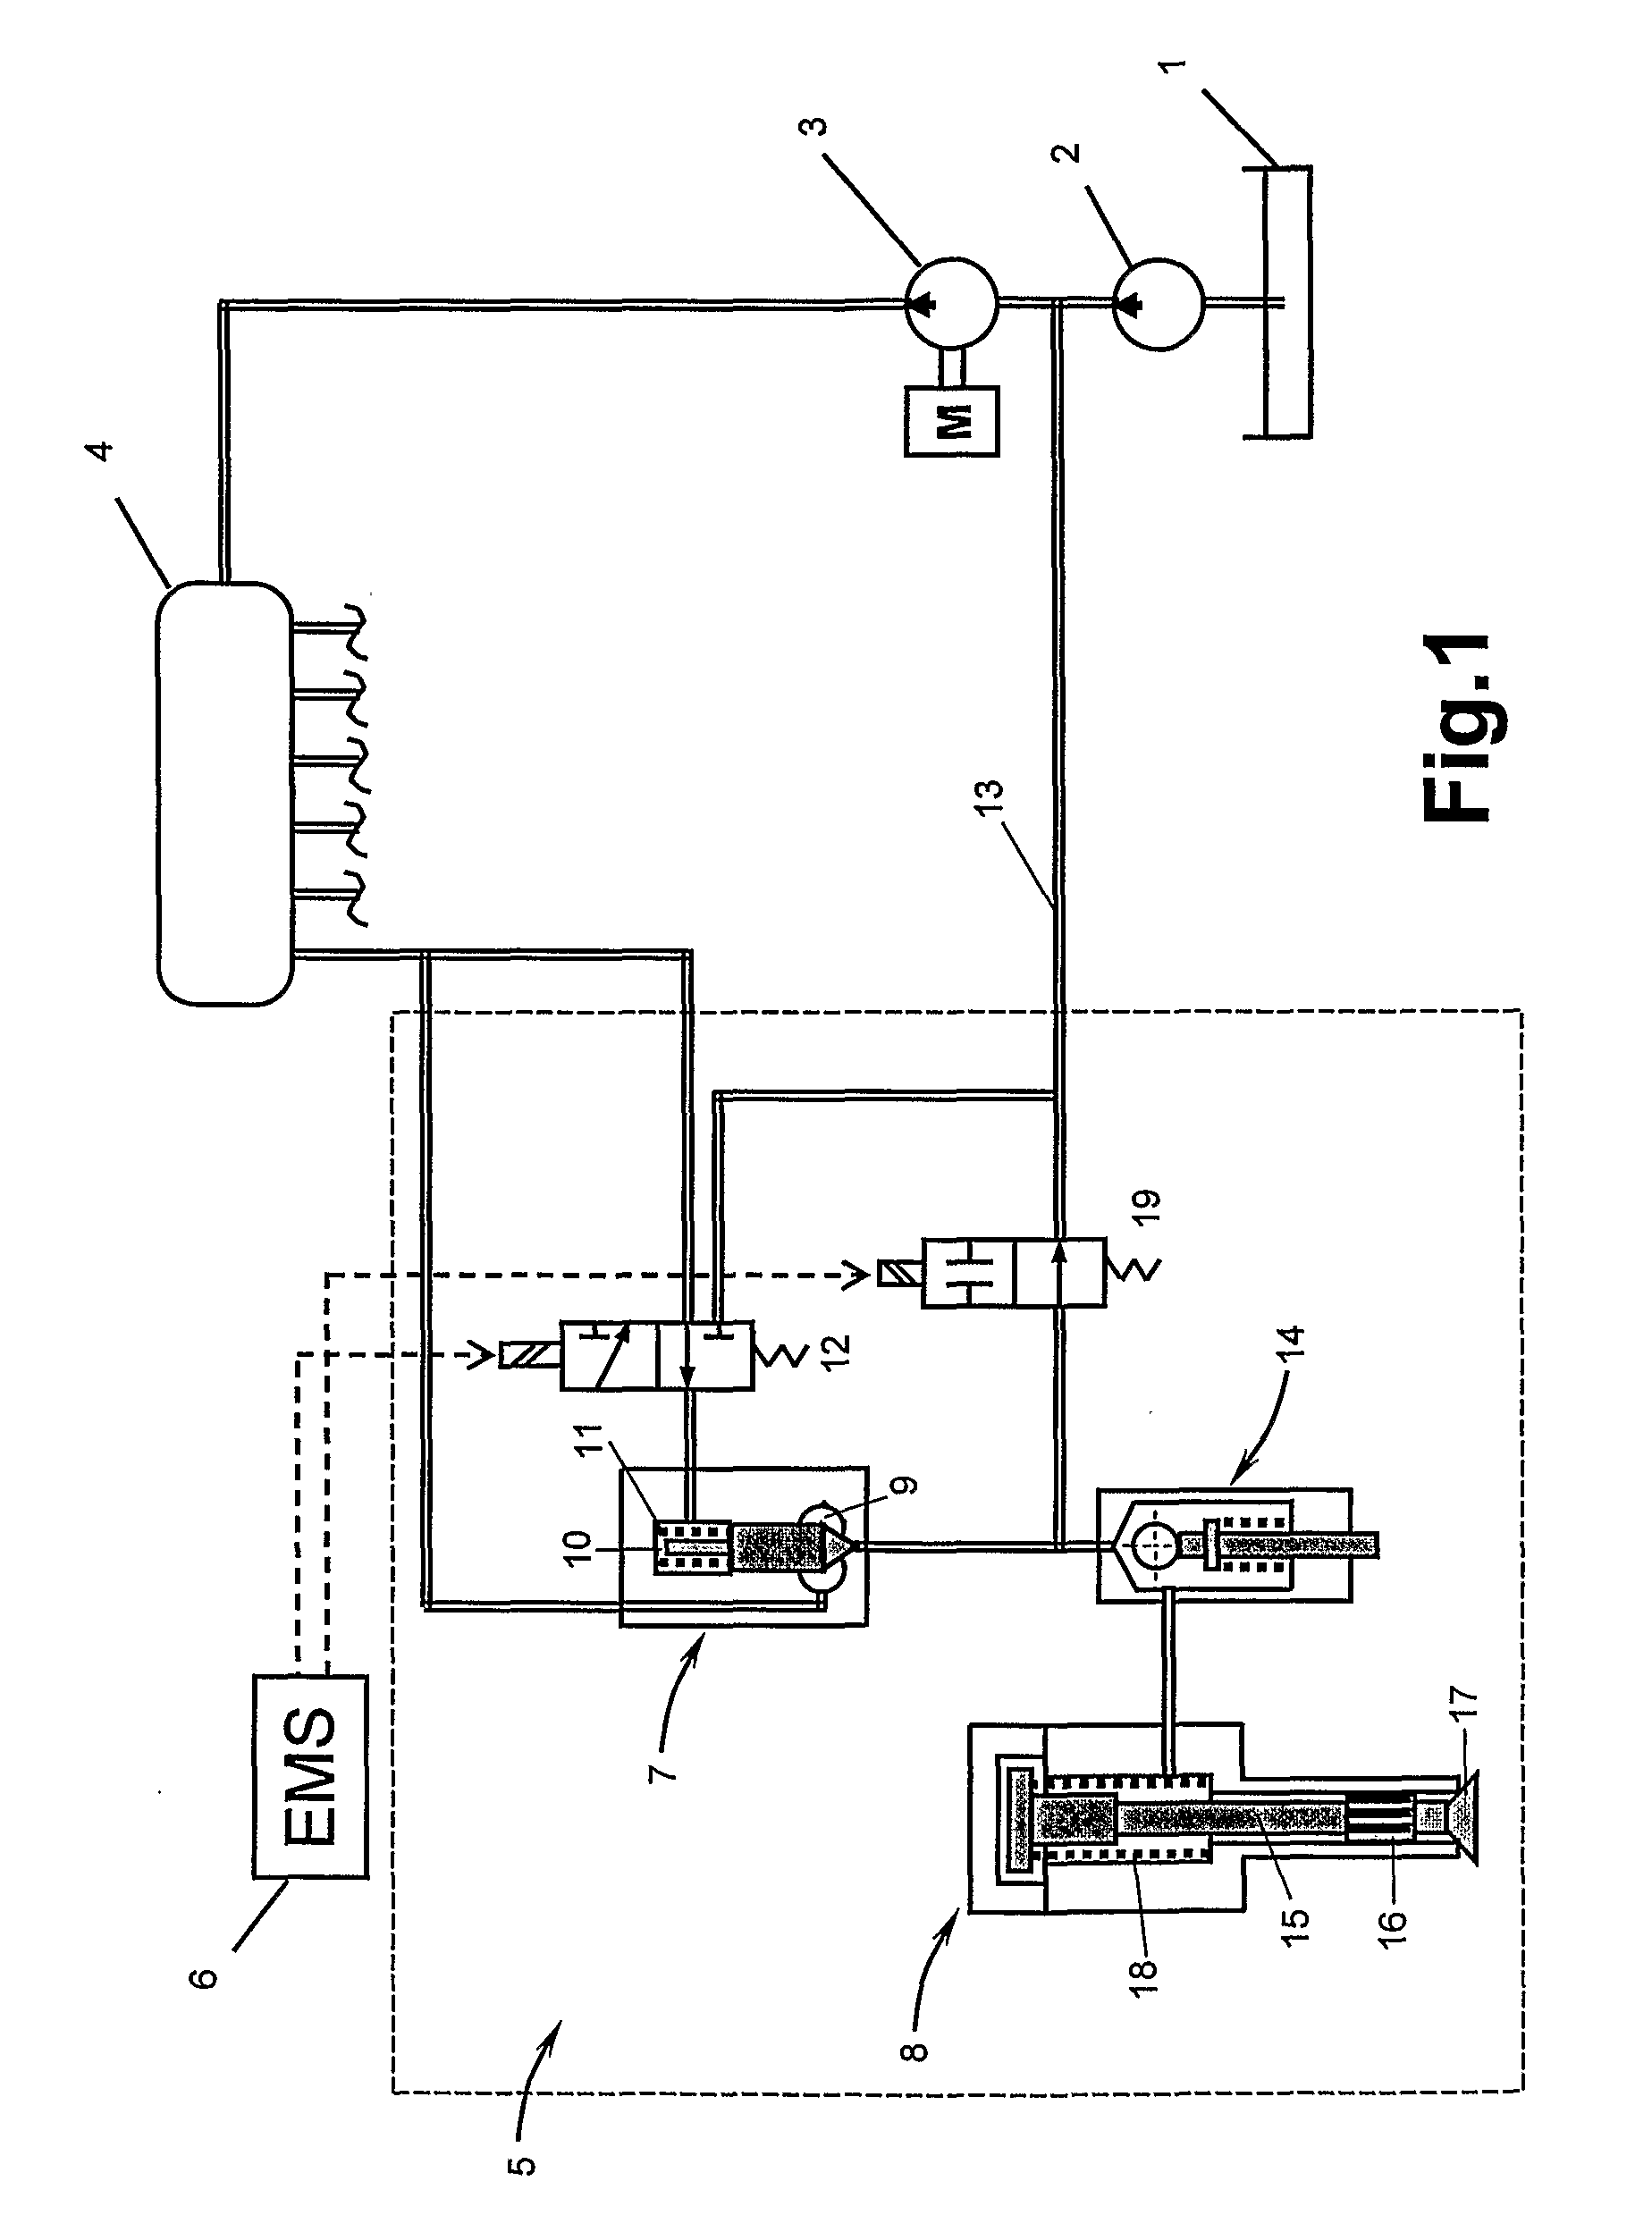 Fuel Injection System Suitable for Low-Viscosity Fuels